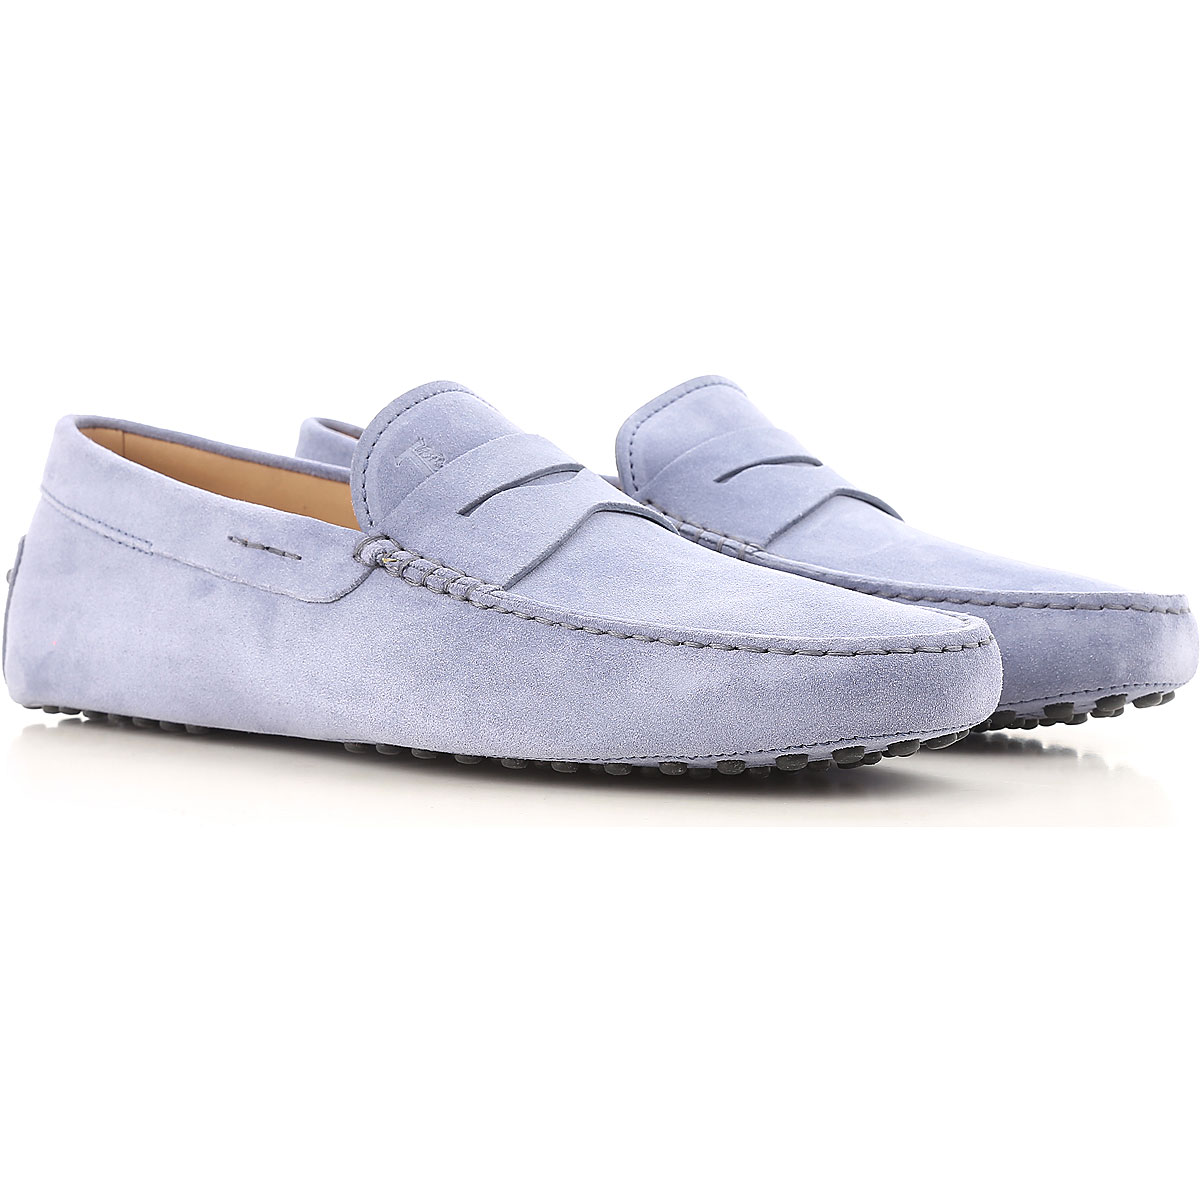 Tod's Mocassin Homme, Lilas, Daim, 2017, 40 41 41.5 42 42.5 43 44 44.5 45